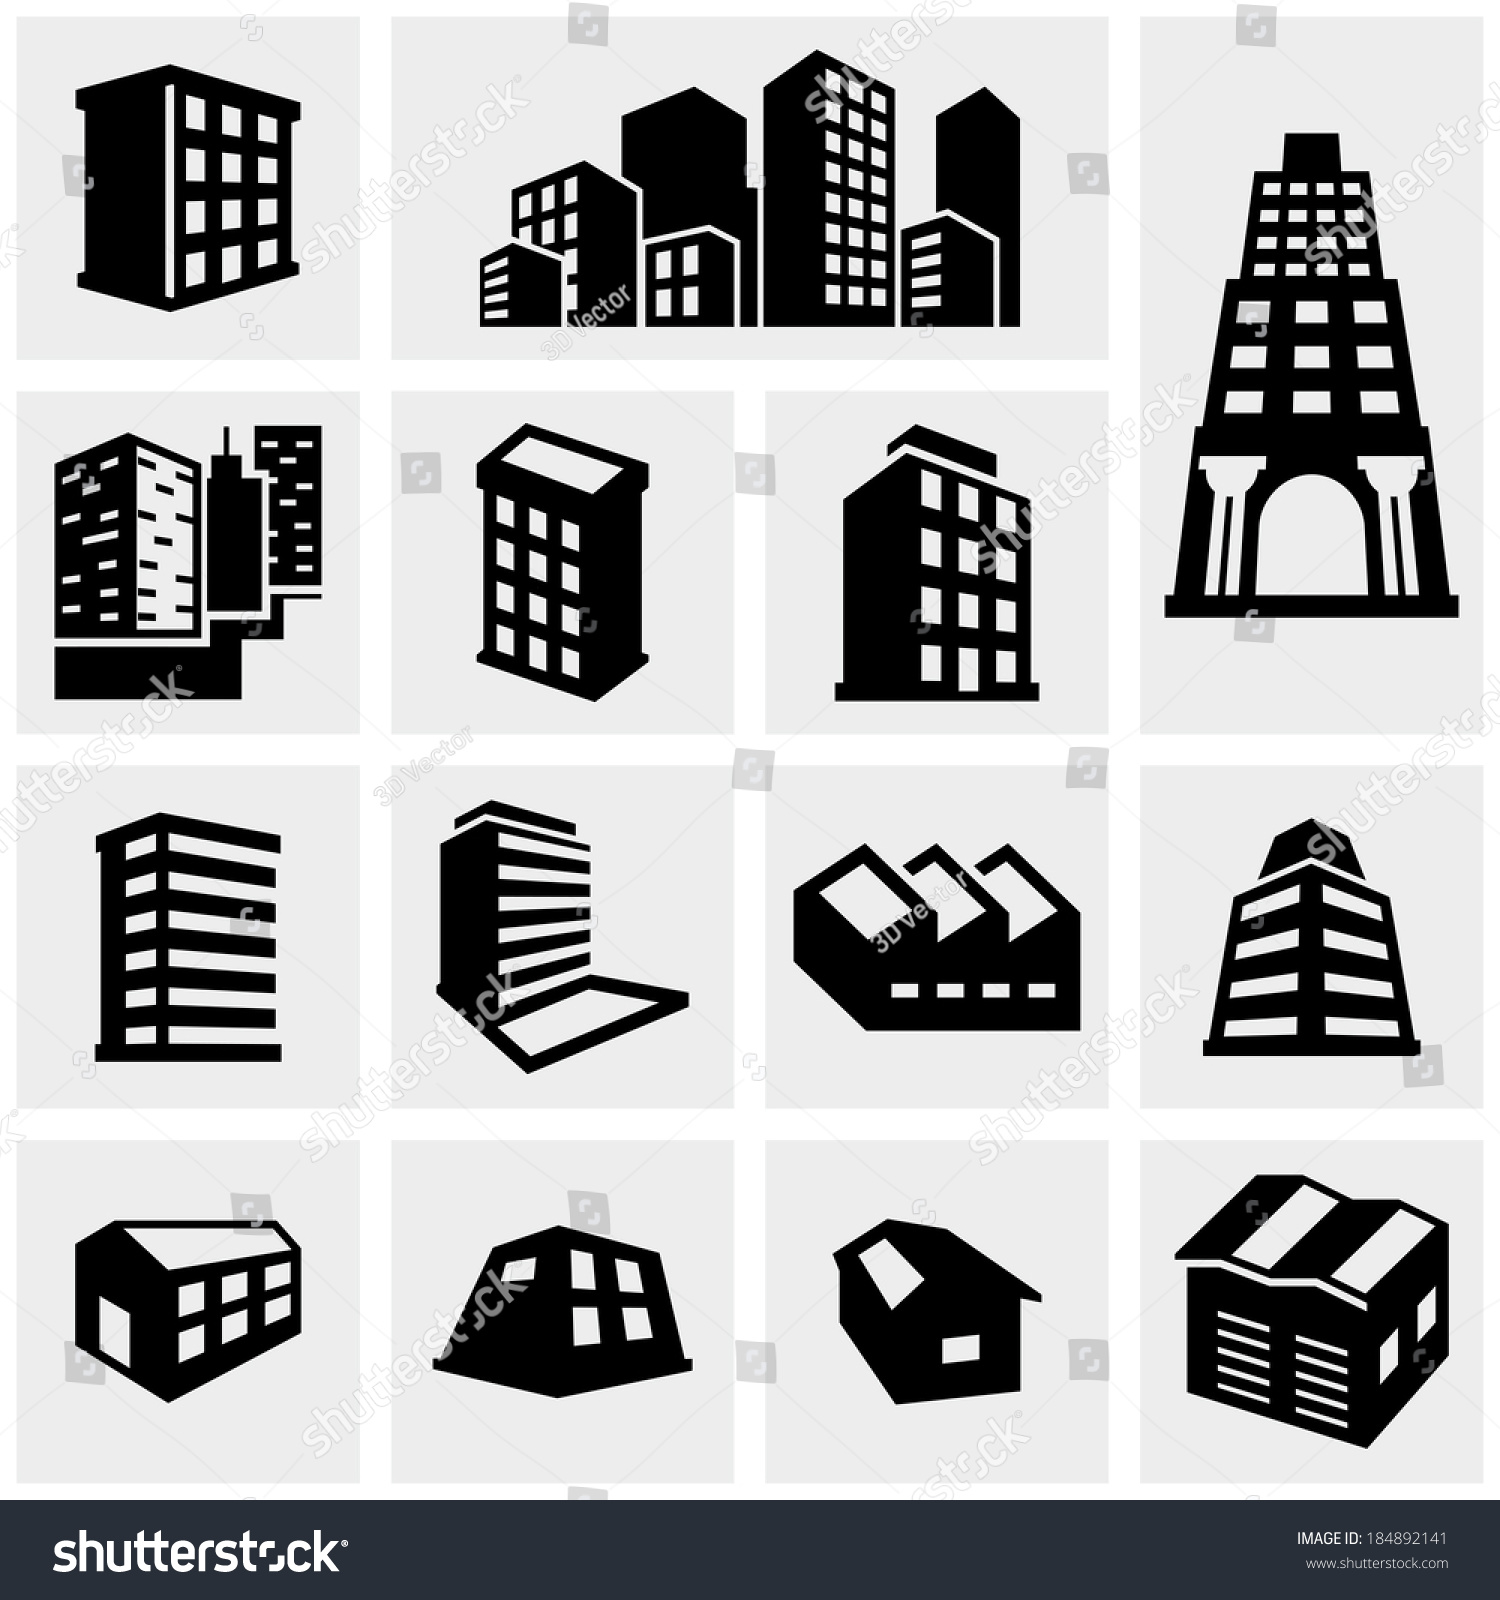 Building vector icons set on gray  #184892141